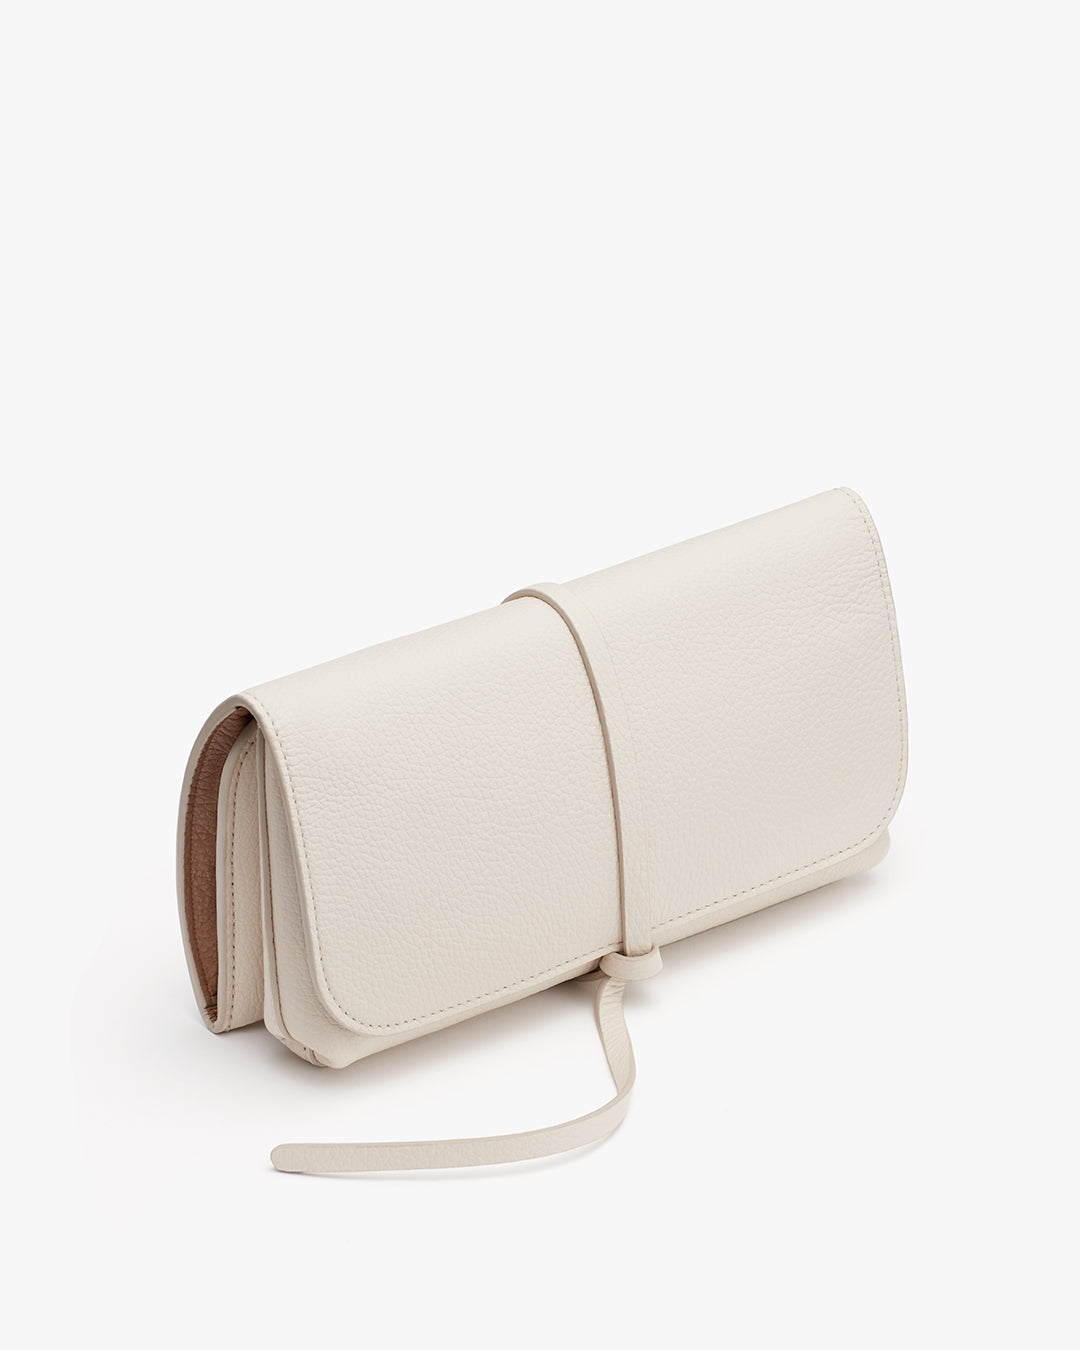 Men Clutches & Wristlet Bags Holiday Essentials For Travel